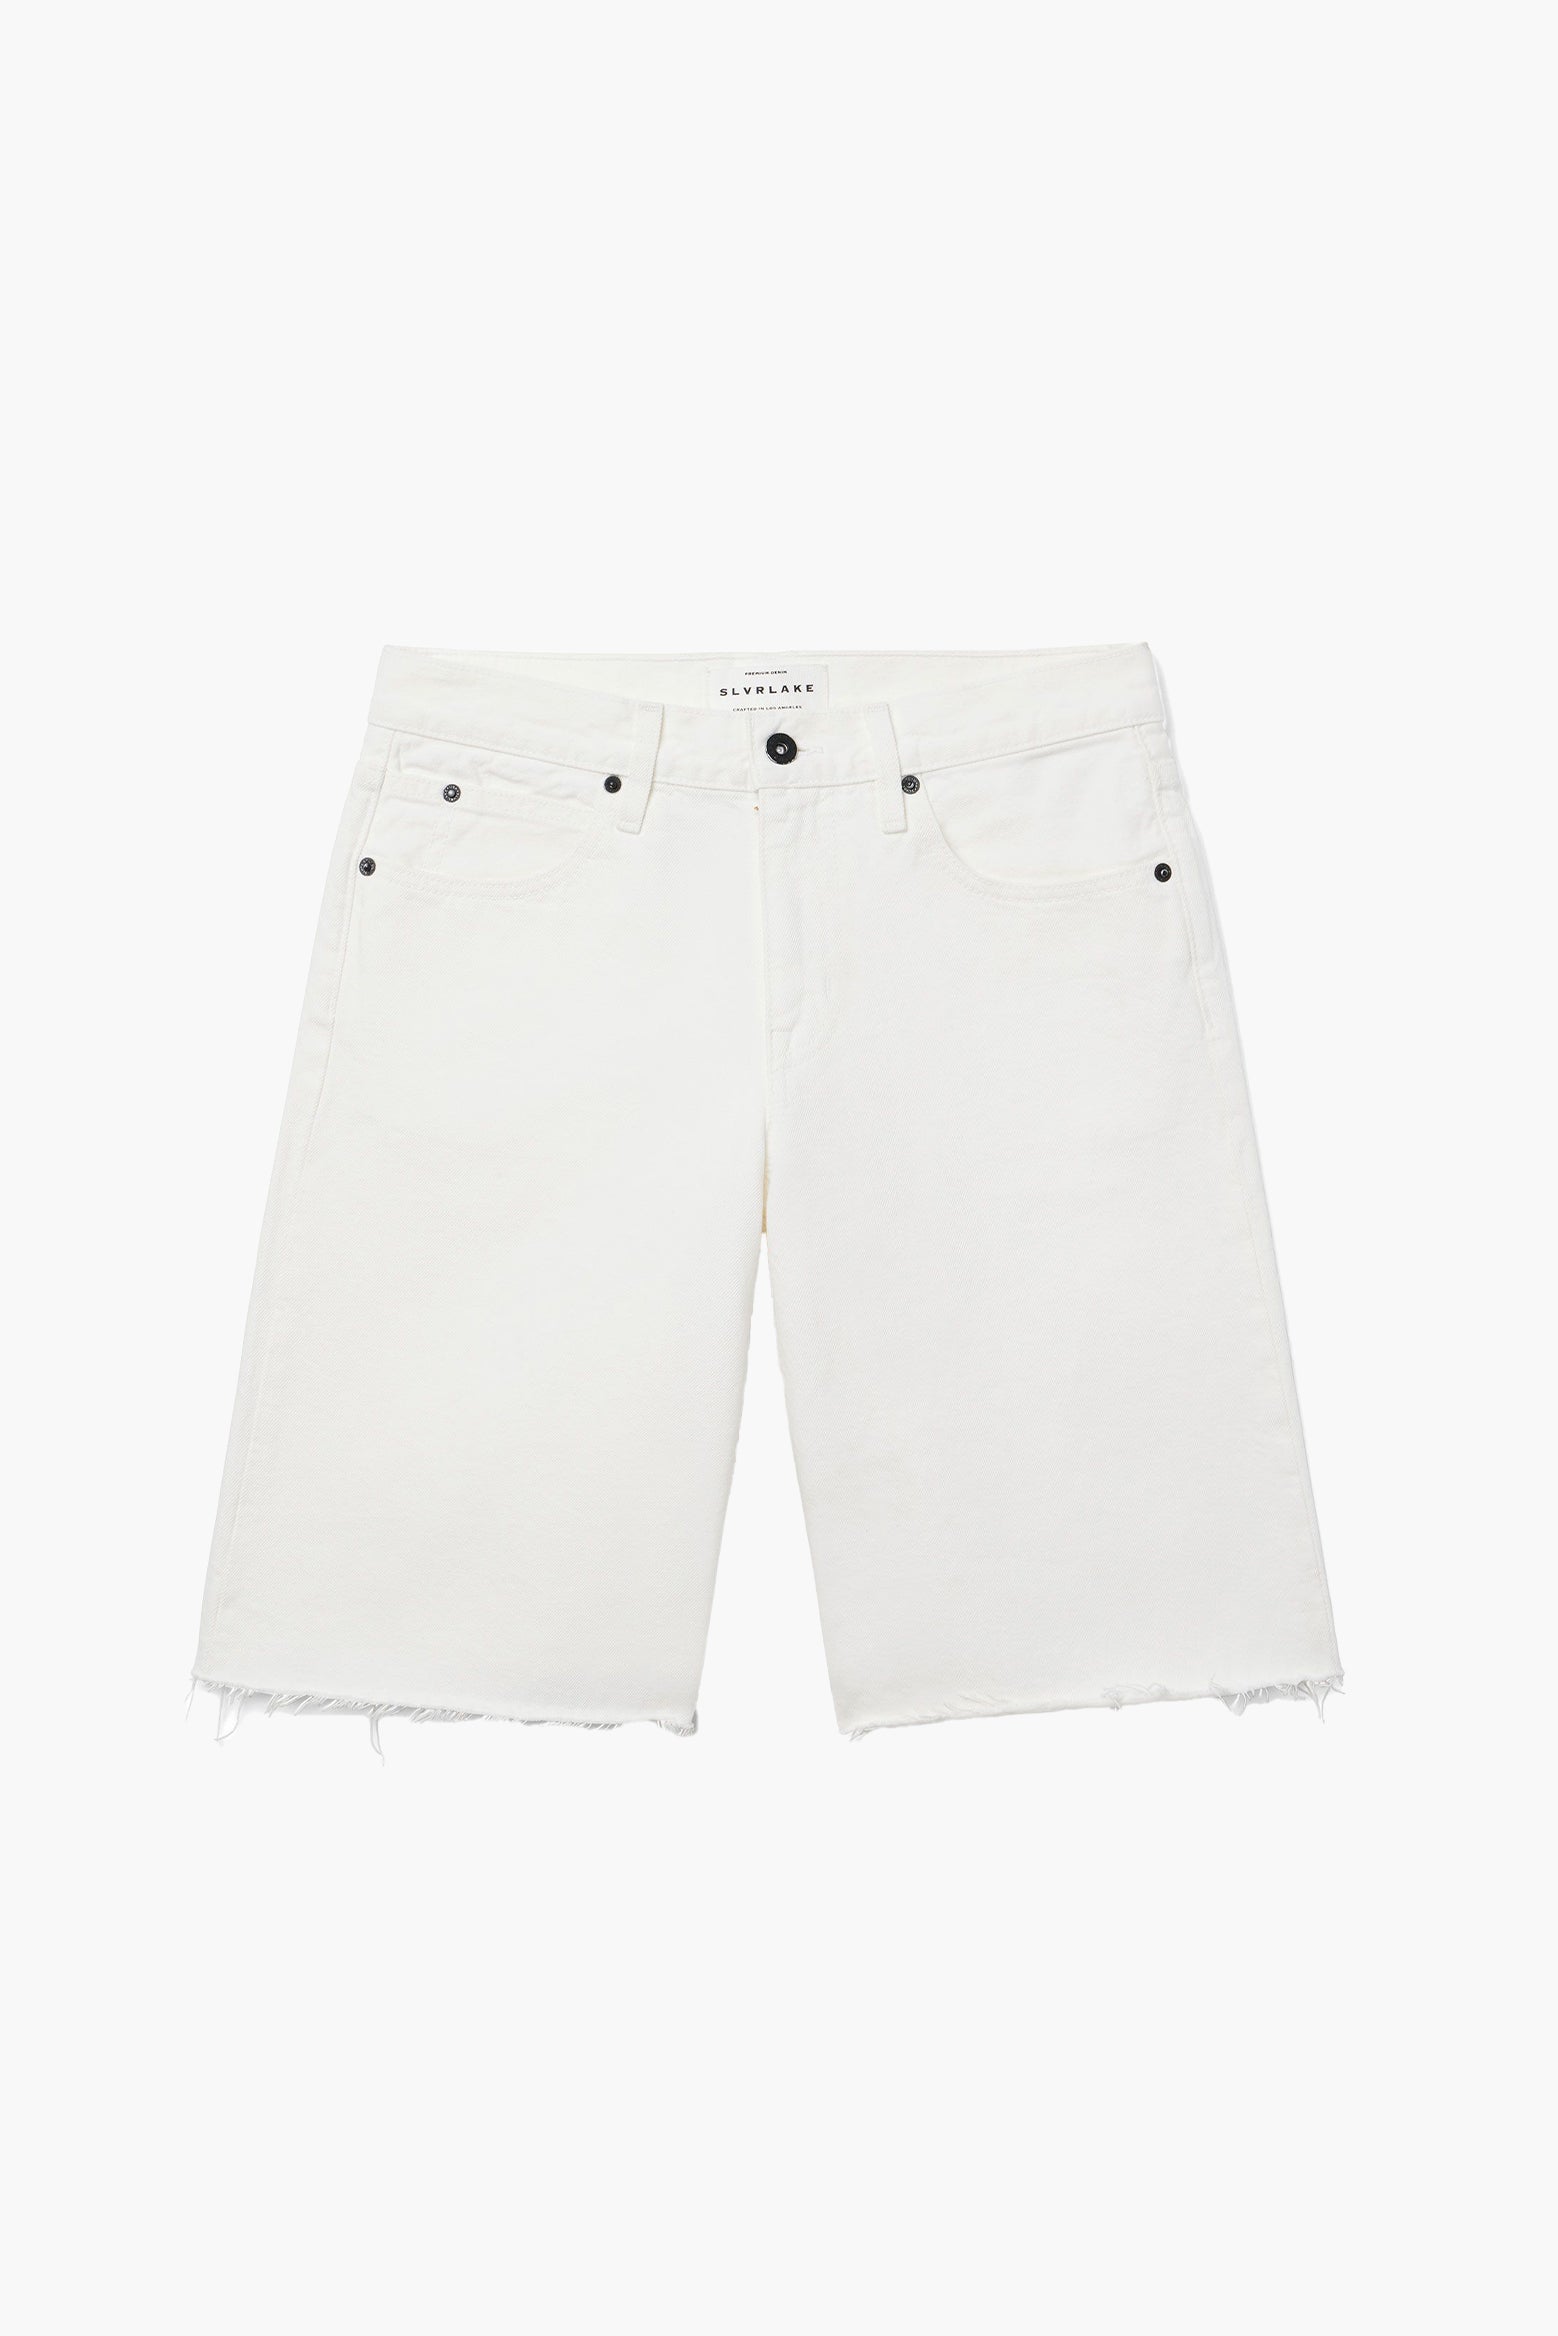 SLVRLAKE Mica Low Rise Wide Leg Short in White available at The New Trend Australia.